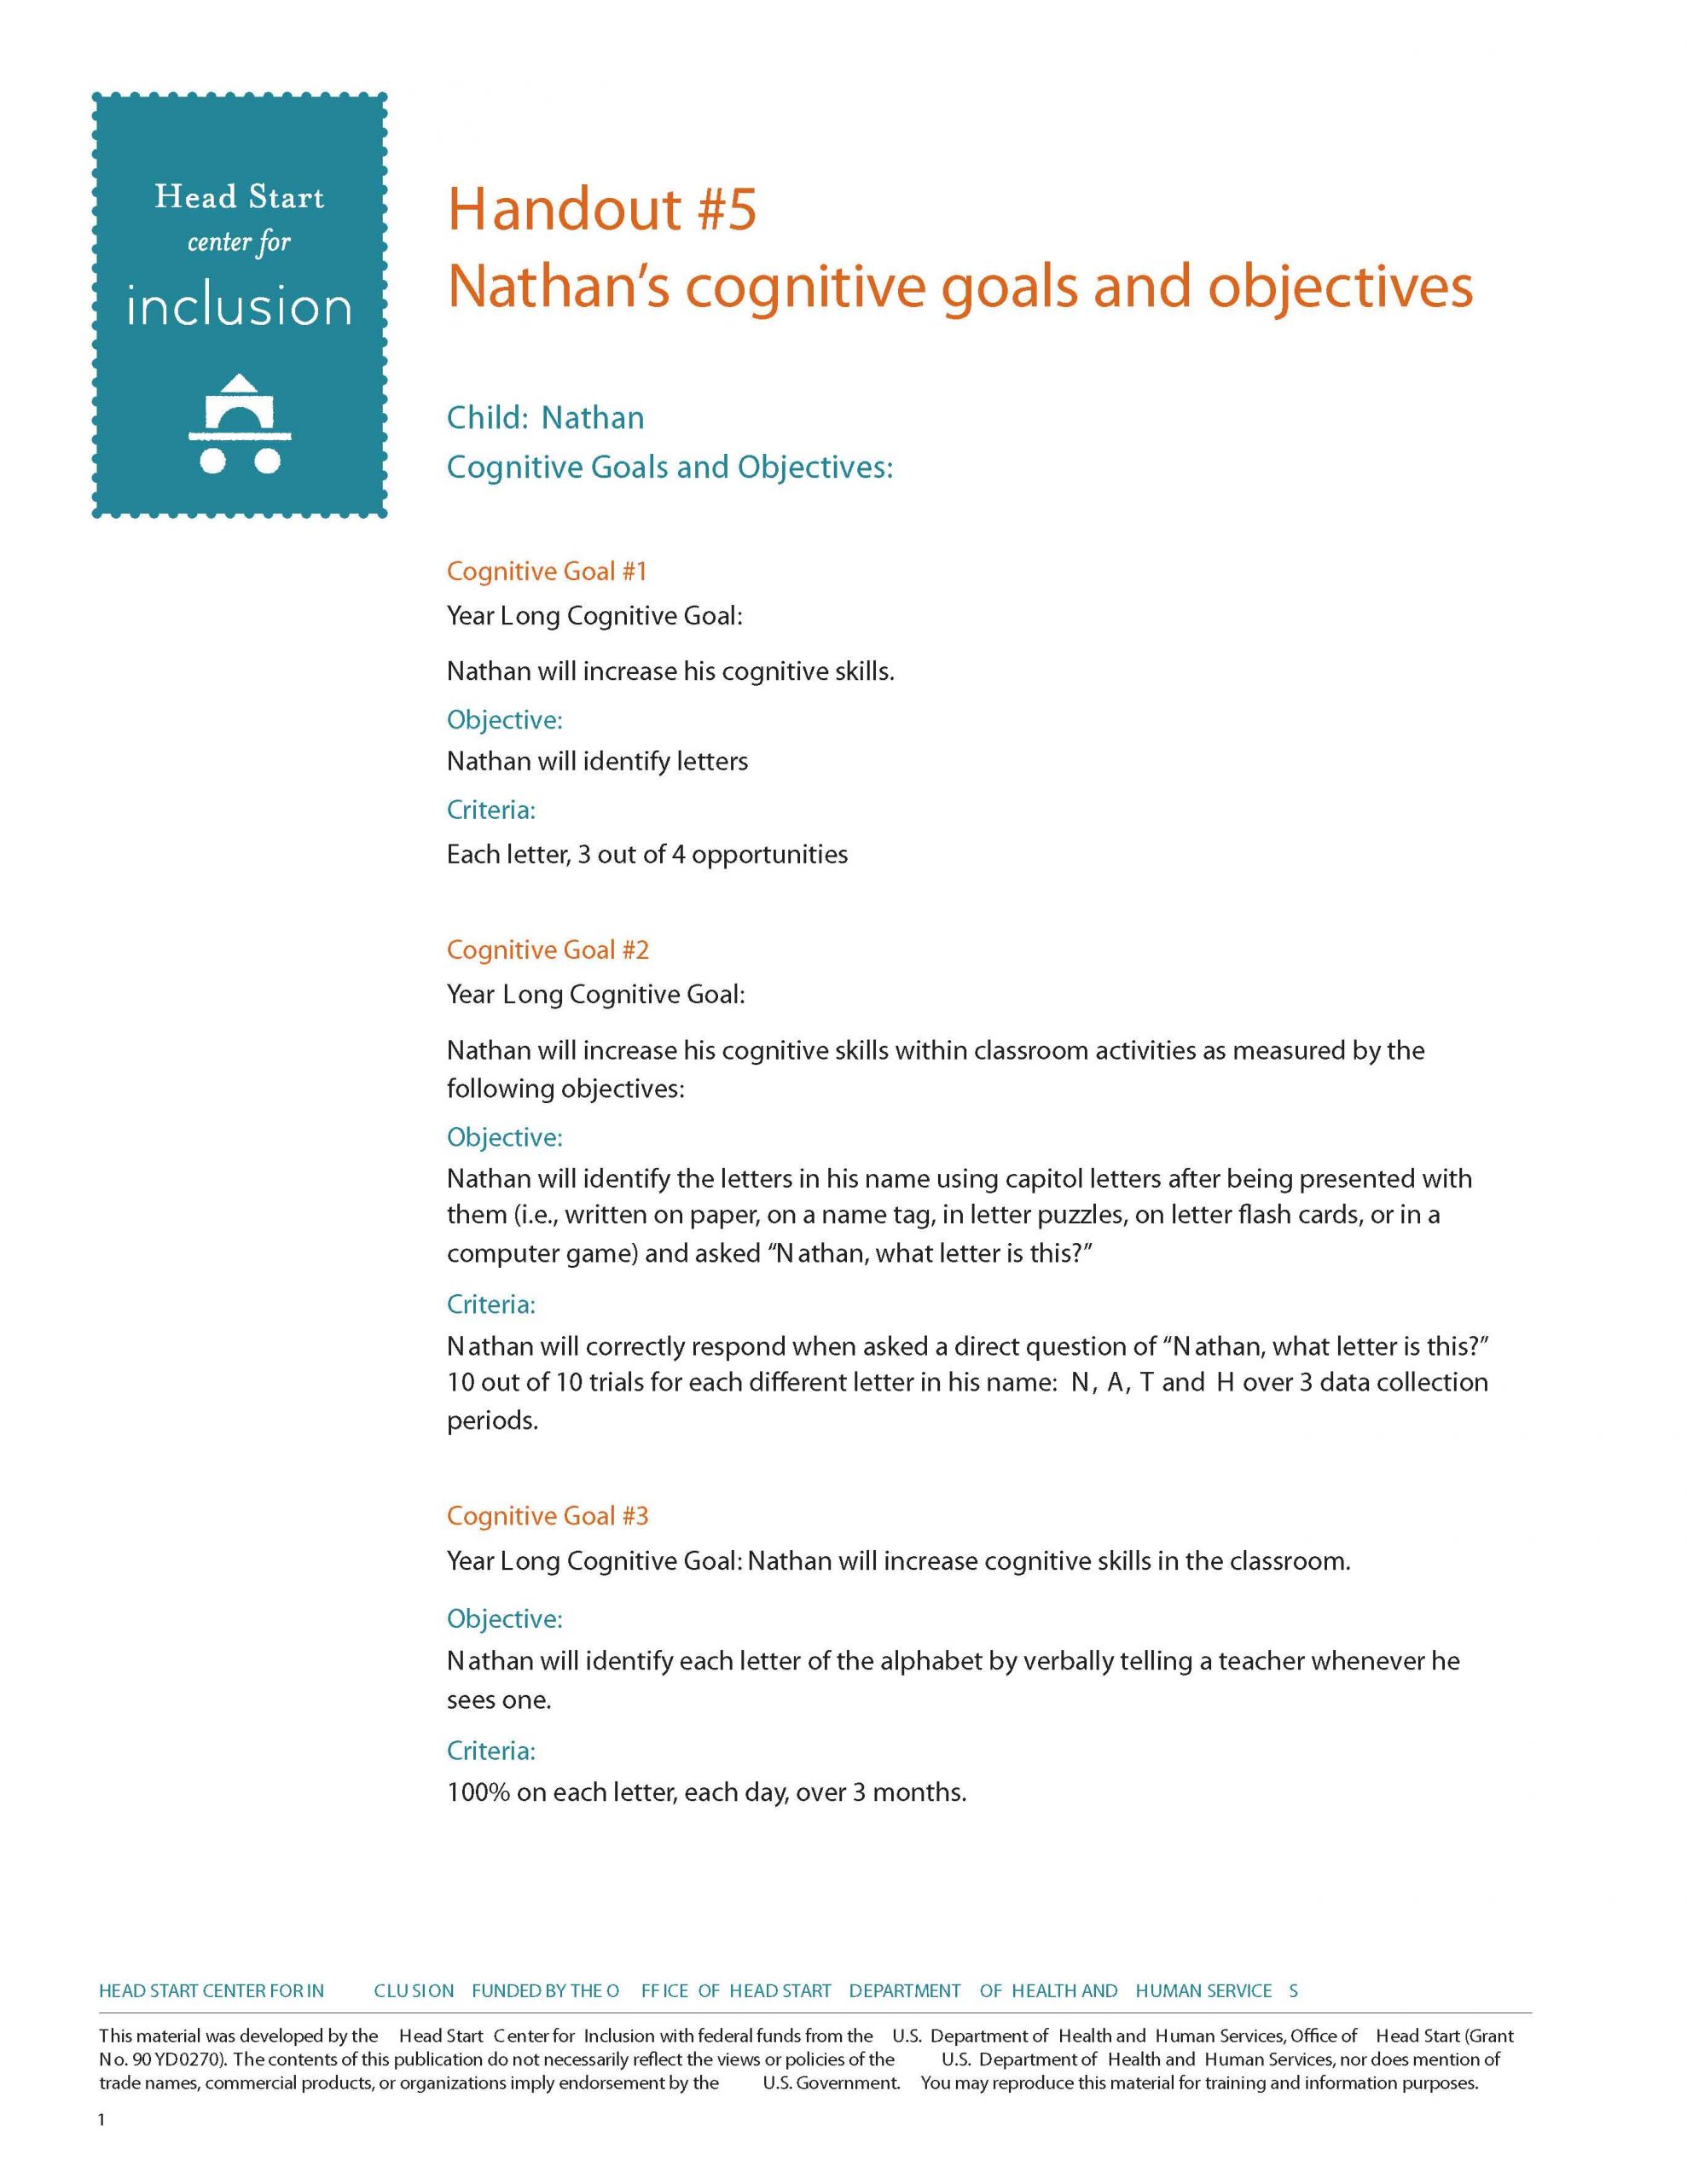 Nathan's Goals & Objectives